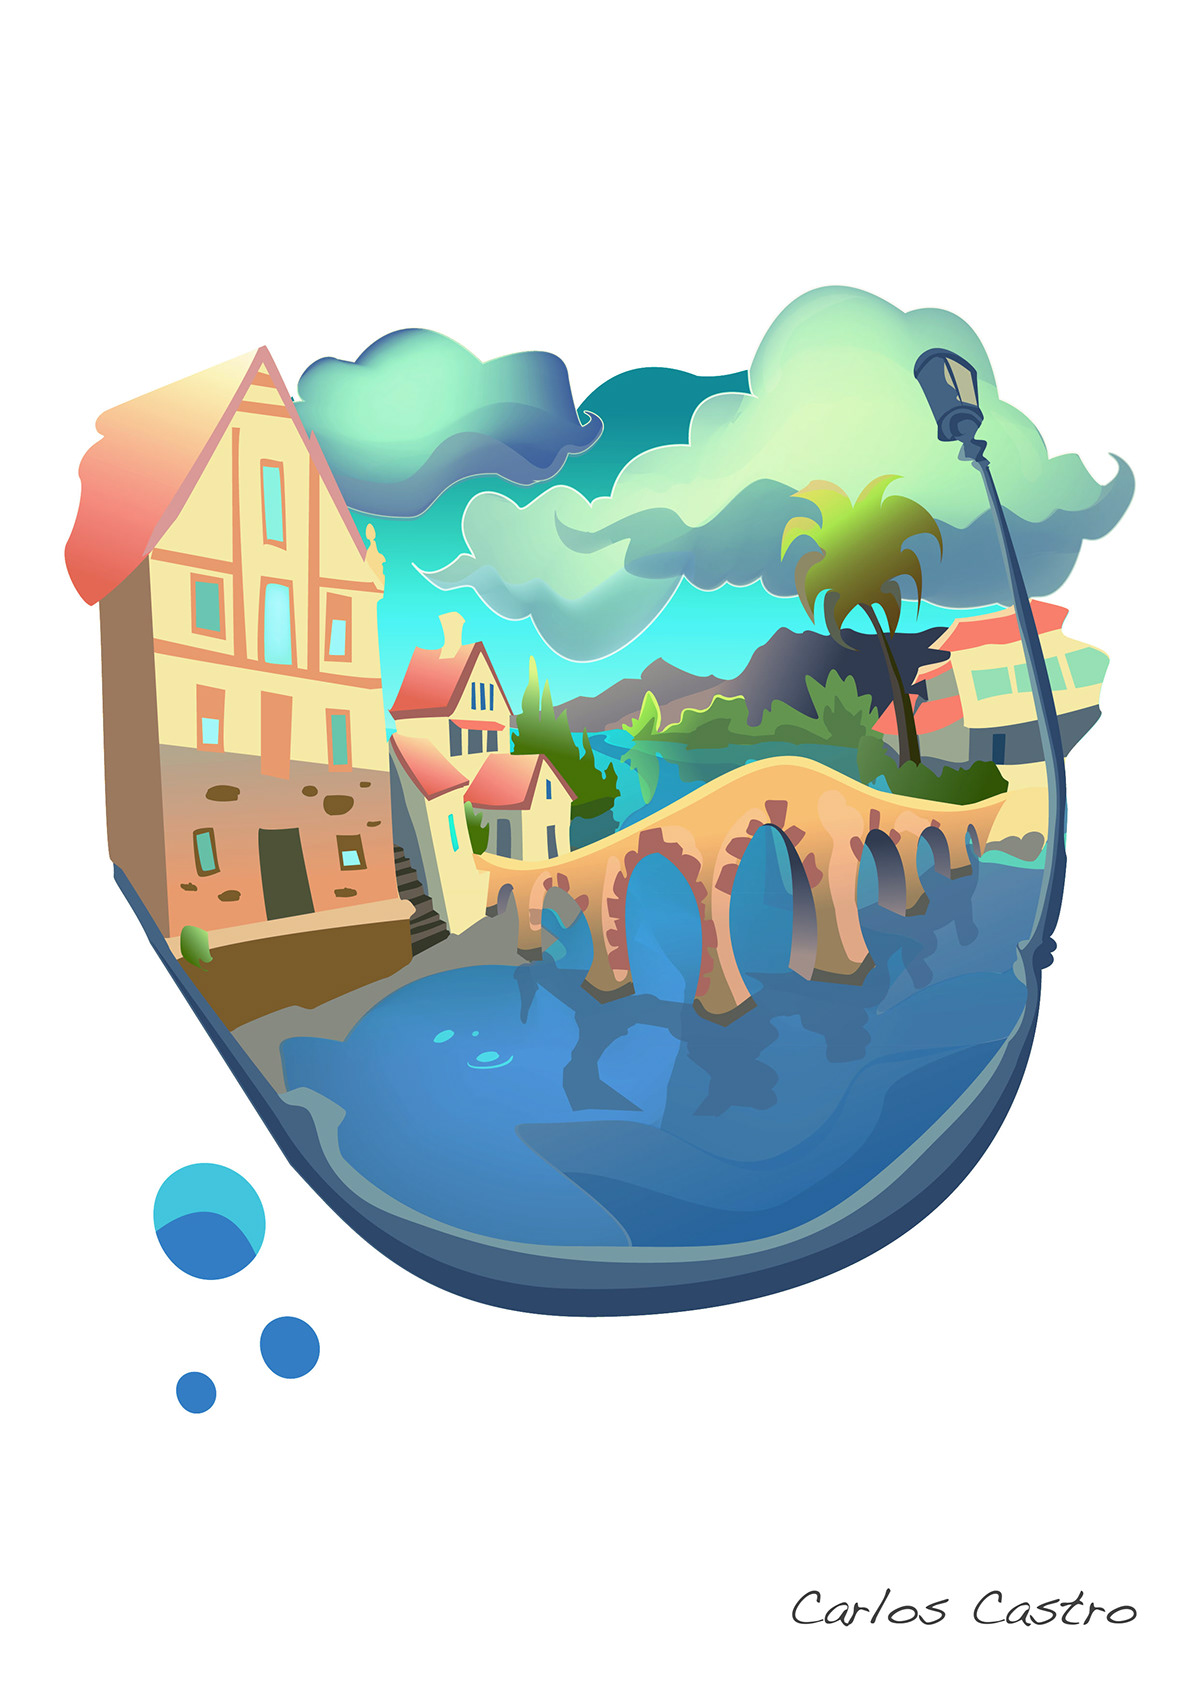 Illustrator  Adobe  adobe illustrator  vector  vectorial  color  backgrounds  fondo  city  town  colourful  cartoon  panorama  nature  drawing